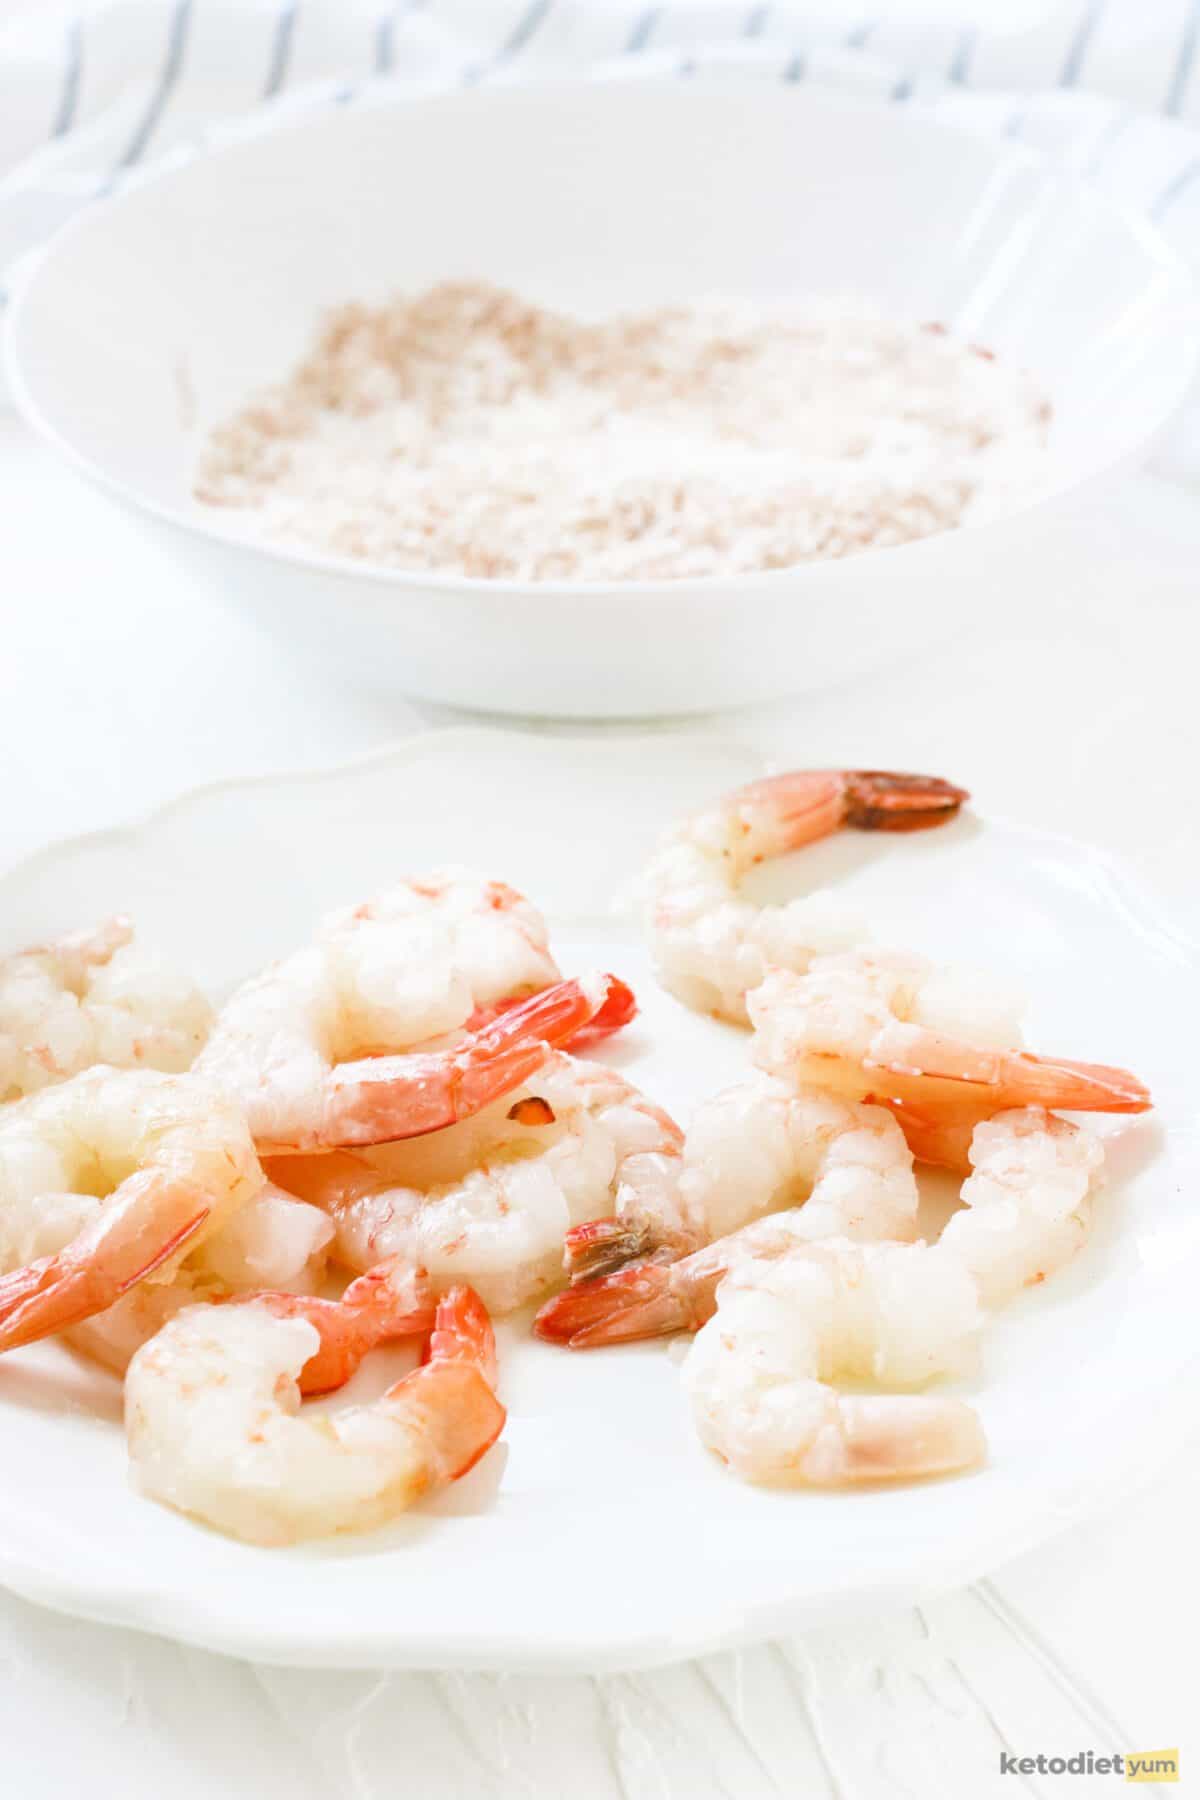 Shelled and deveined shrimp with the tails still on ready to be dipped in egg and coated with seasoned shredded coconut